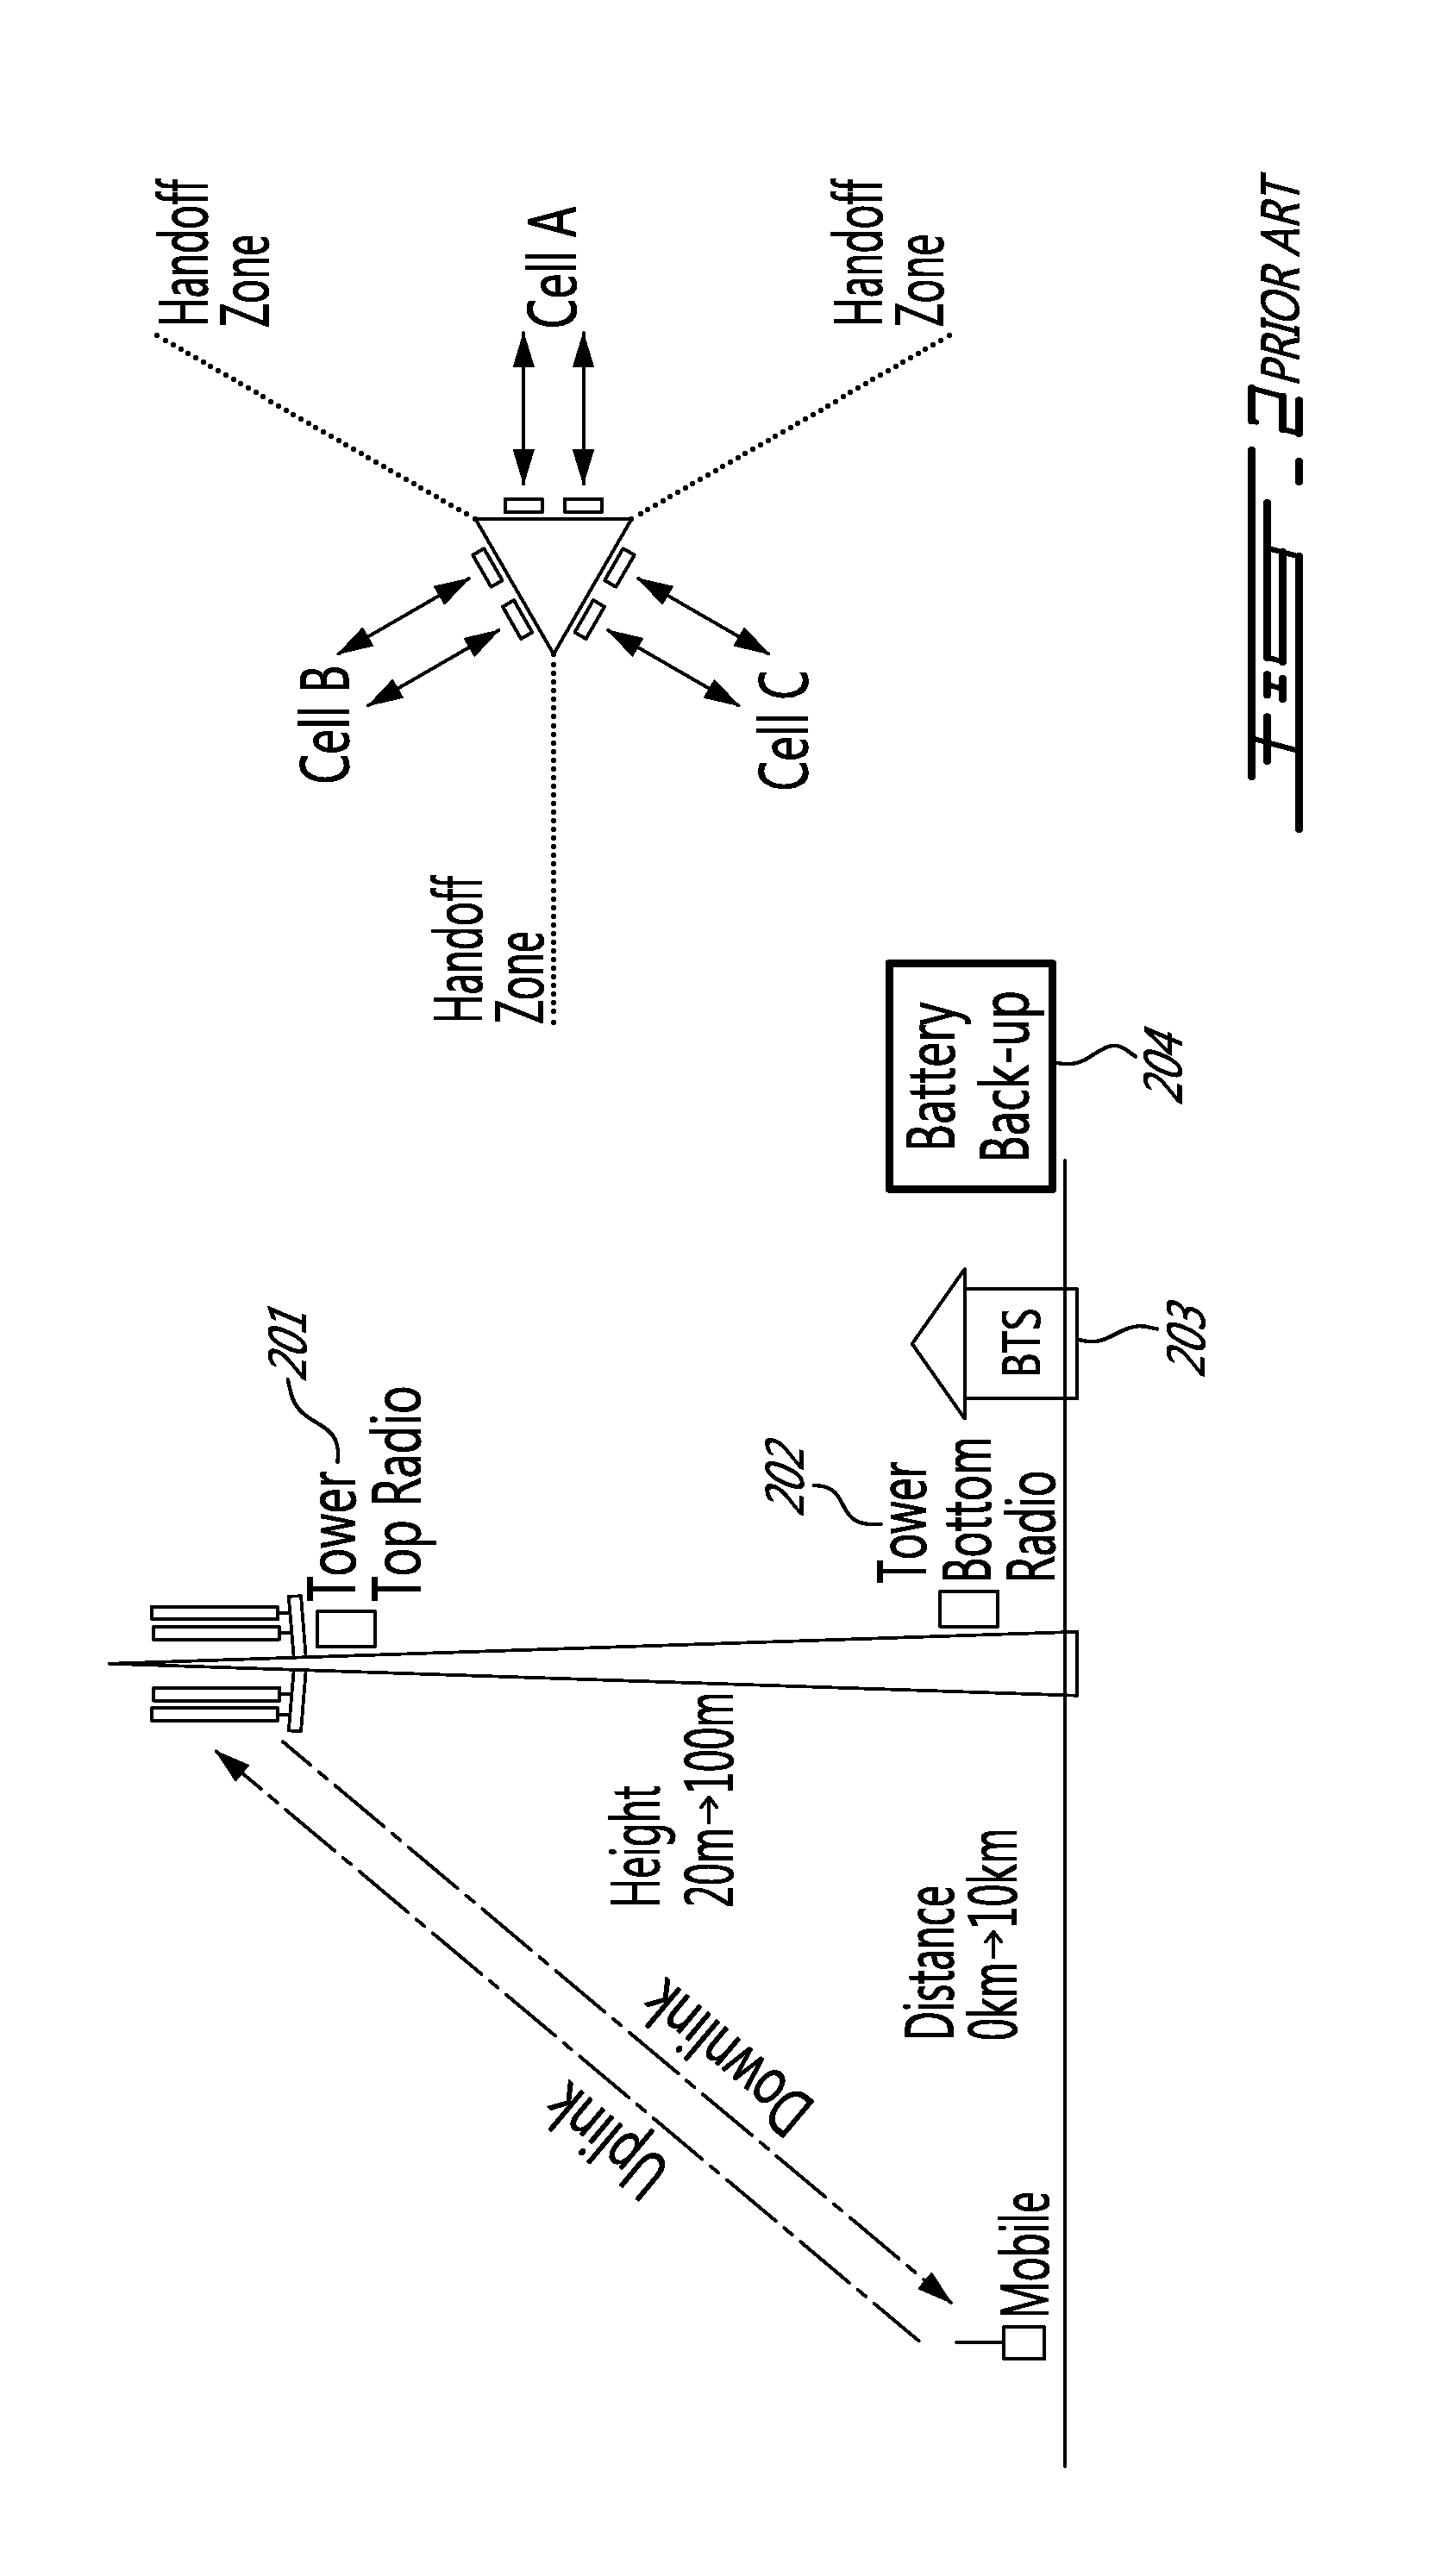 Method and system for providing wireless base station radio with non-disruptive service power class switching